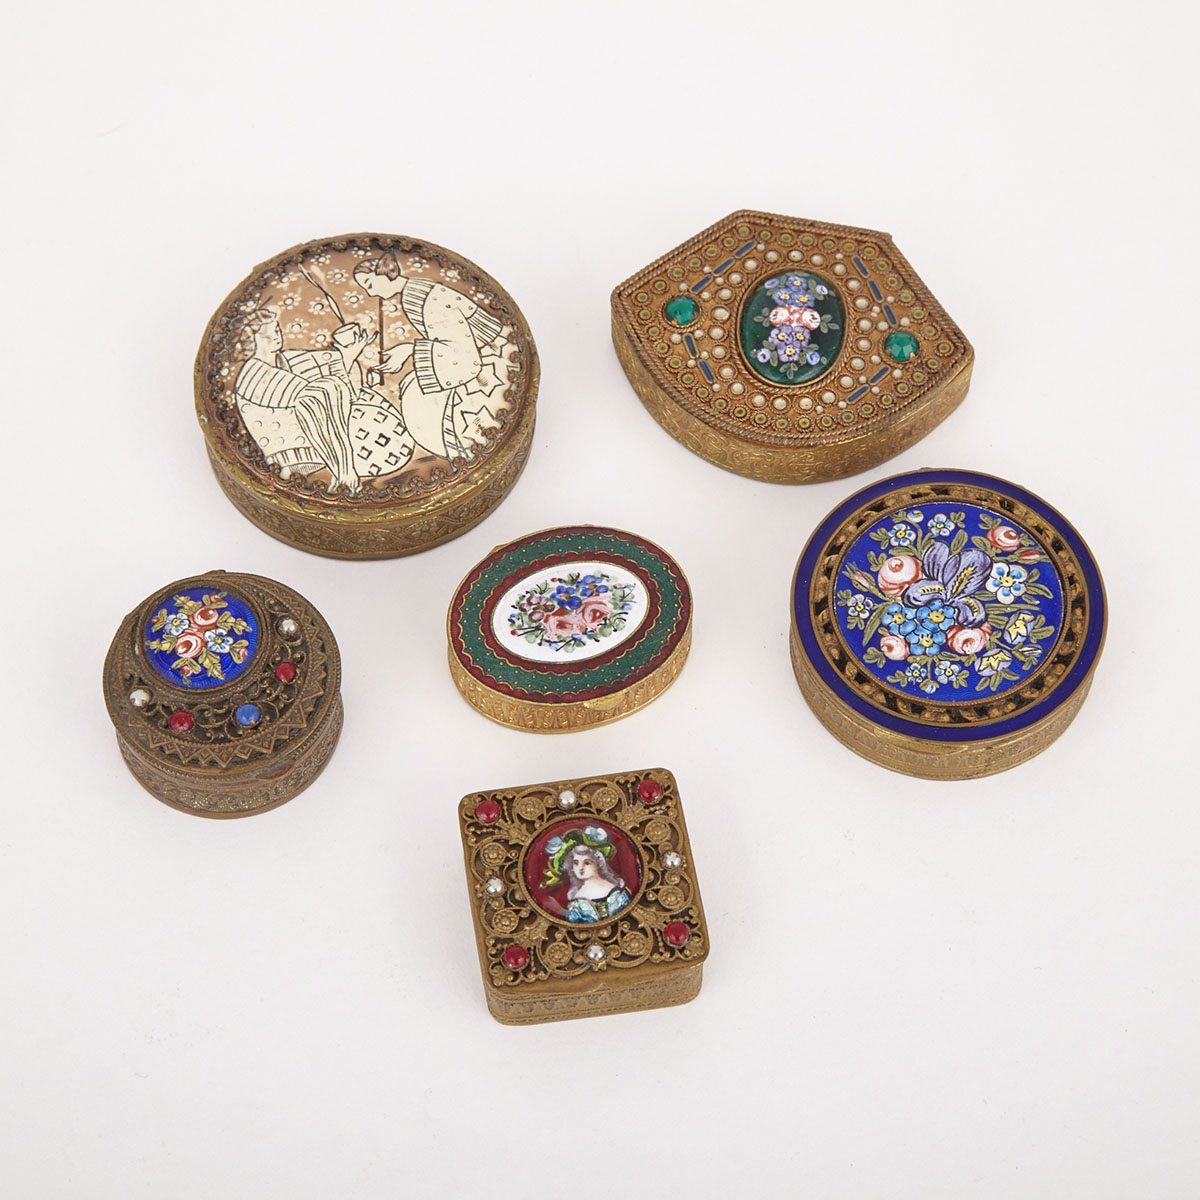 Group of Six Enameled Gilt Metal Patch Boxes, 20th century